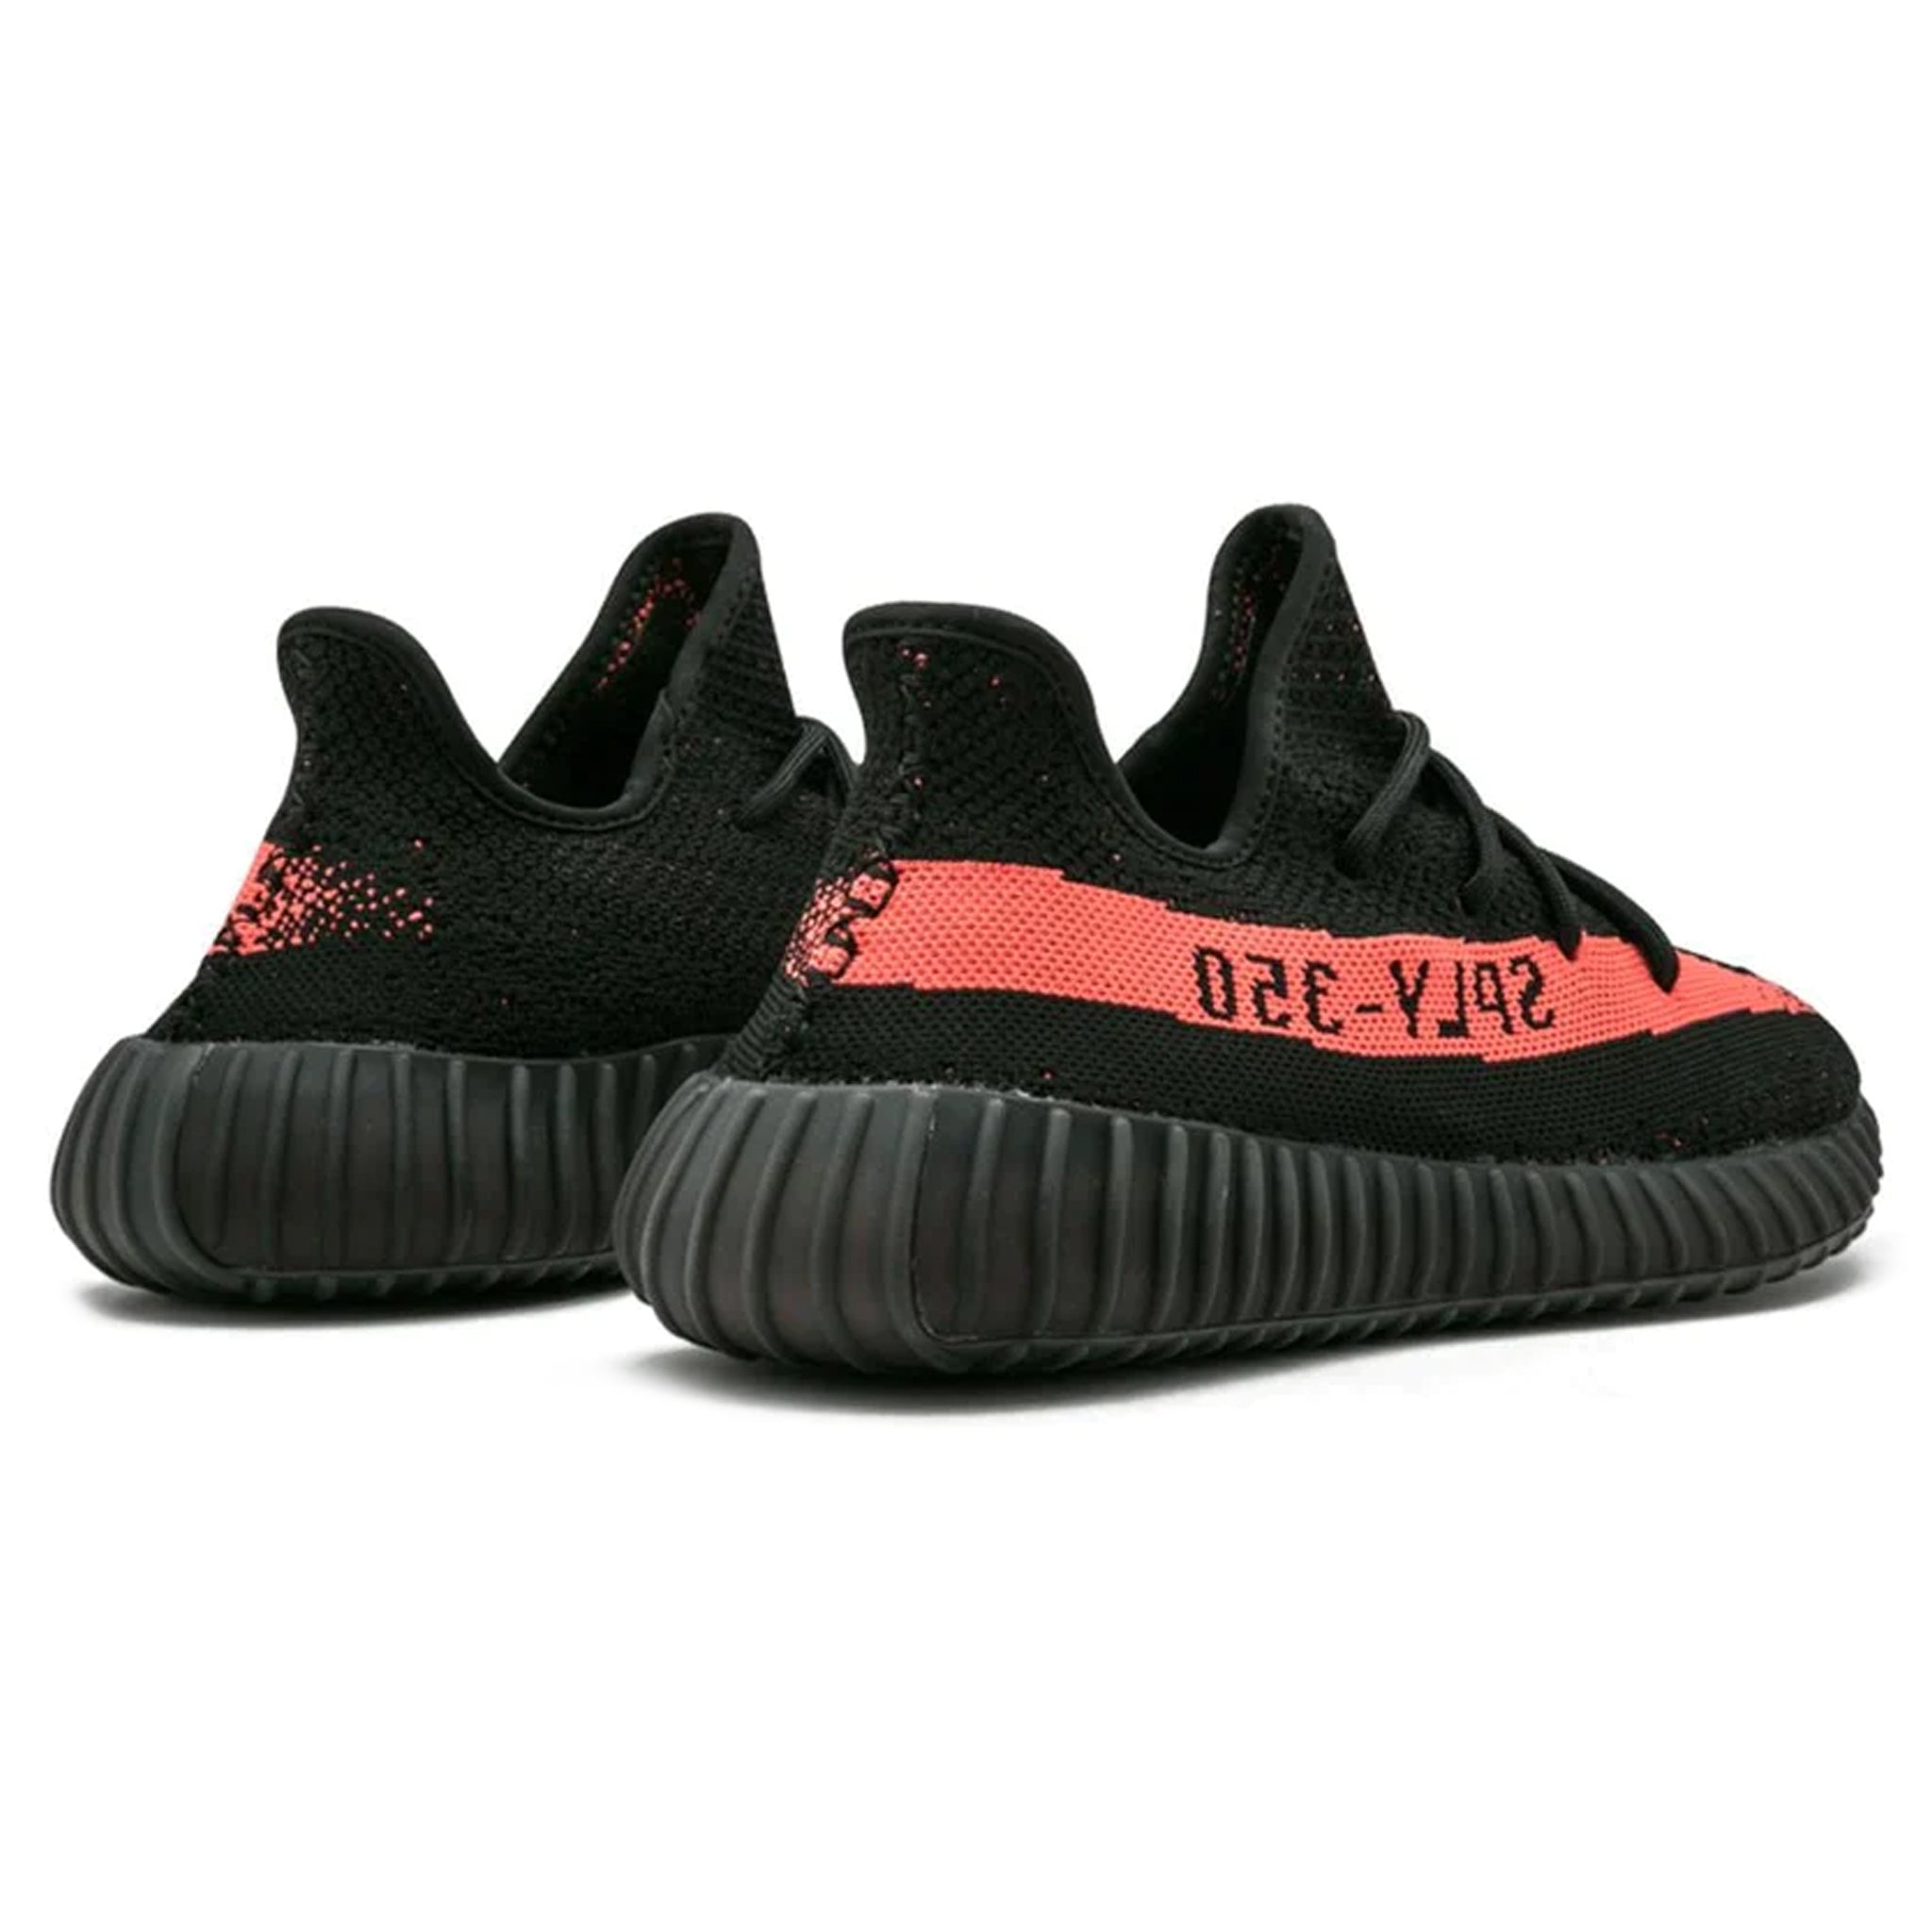 Heel view of Adidas Yeezy Boost 350 V2 Core Black Red  BY9612